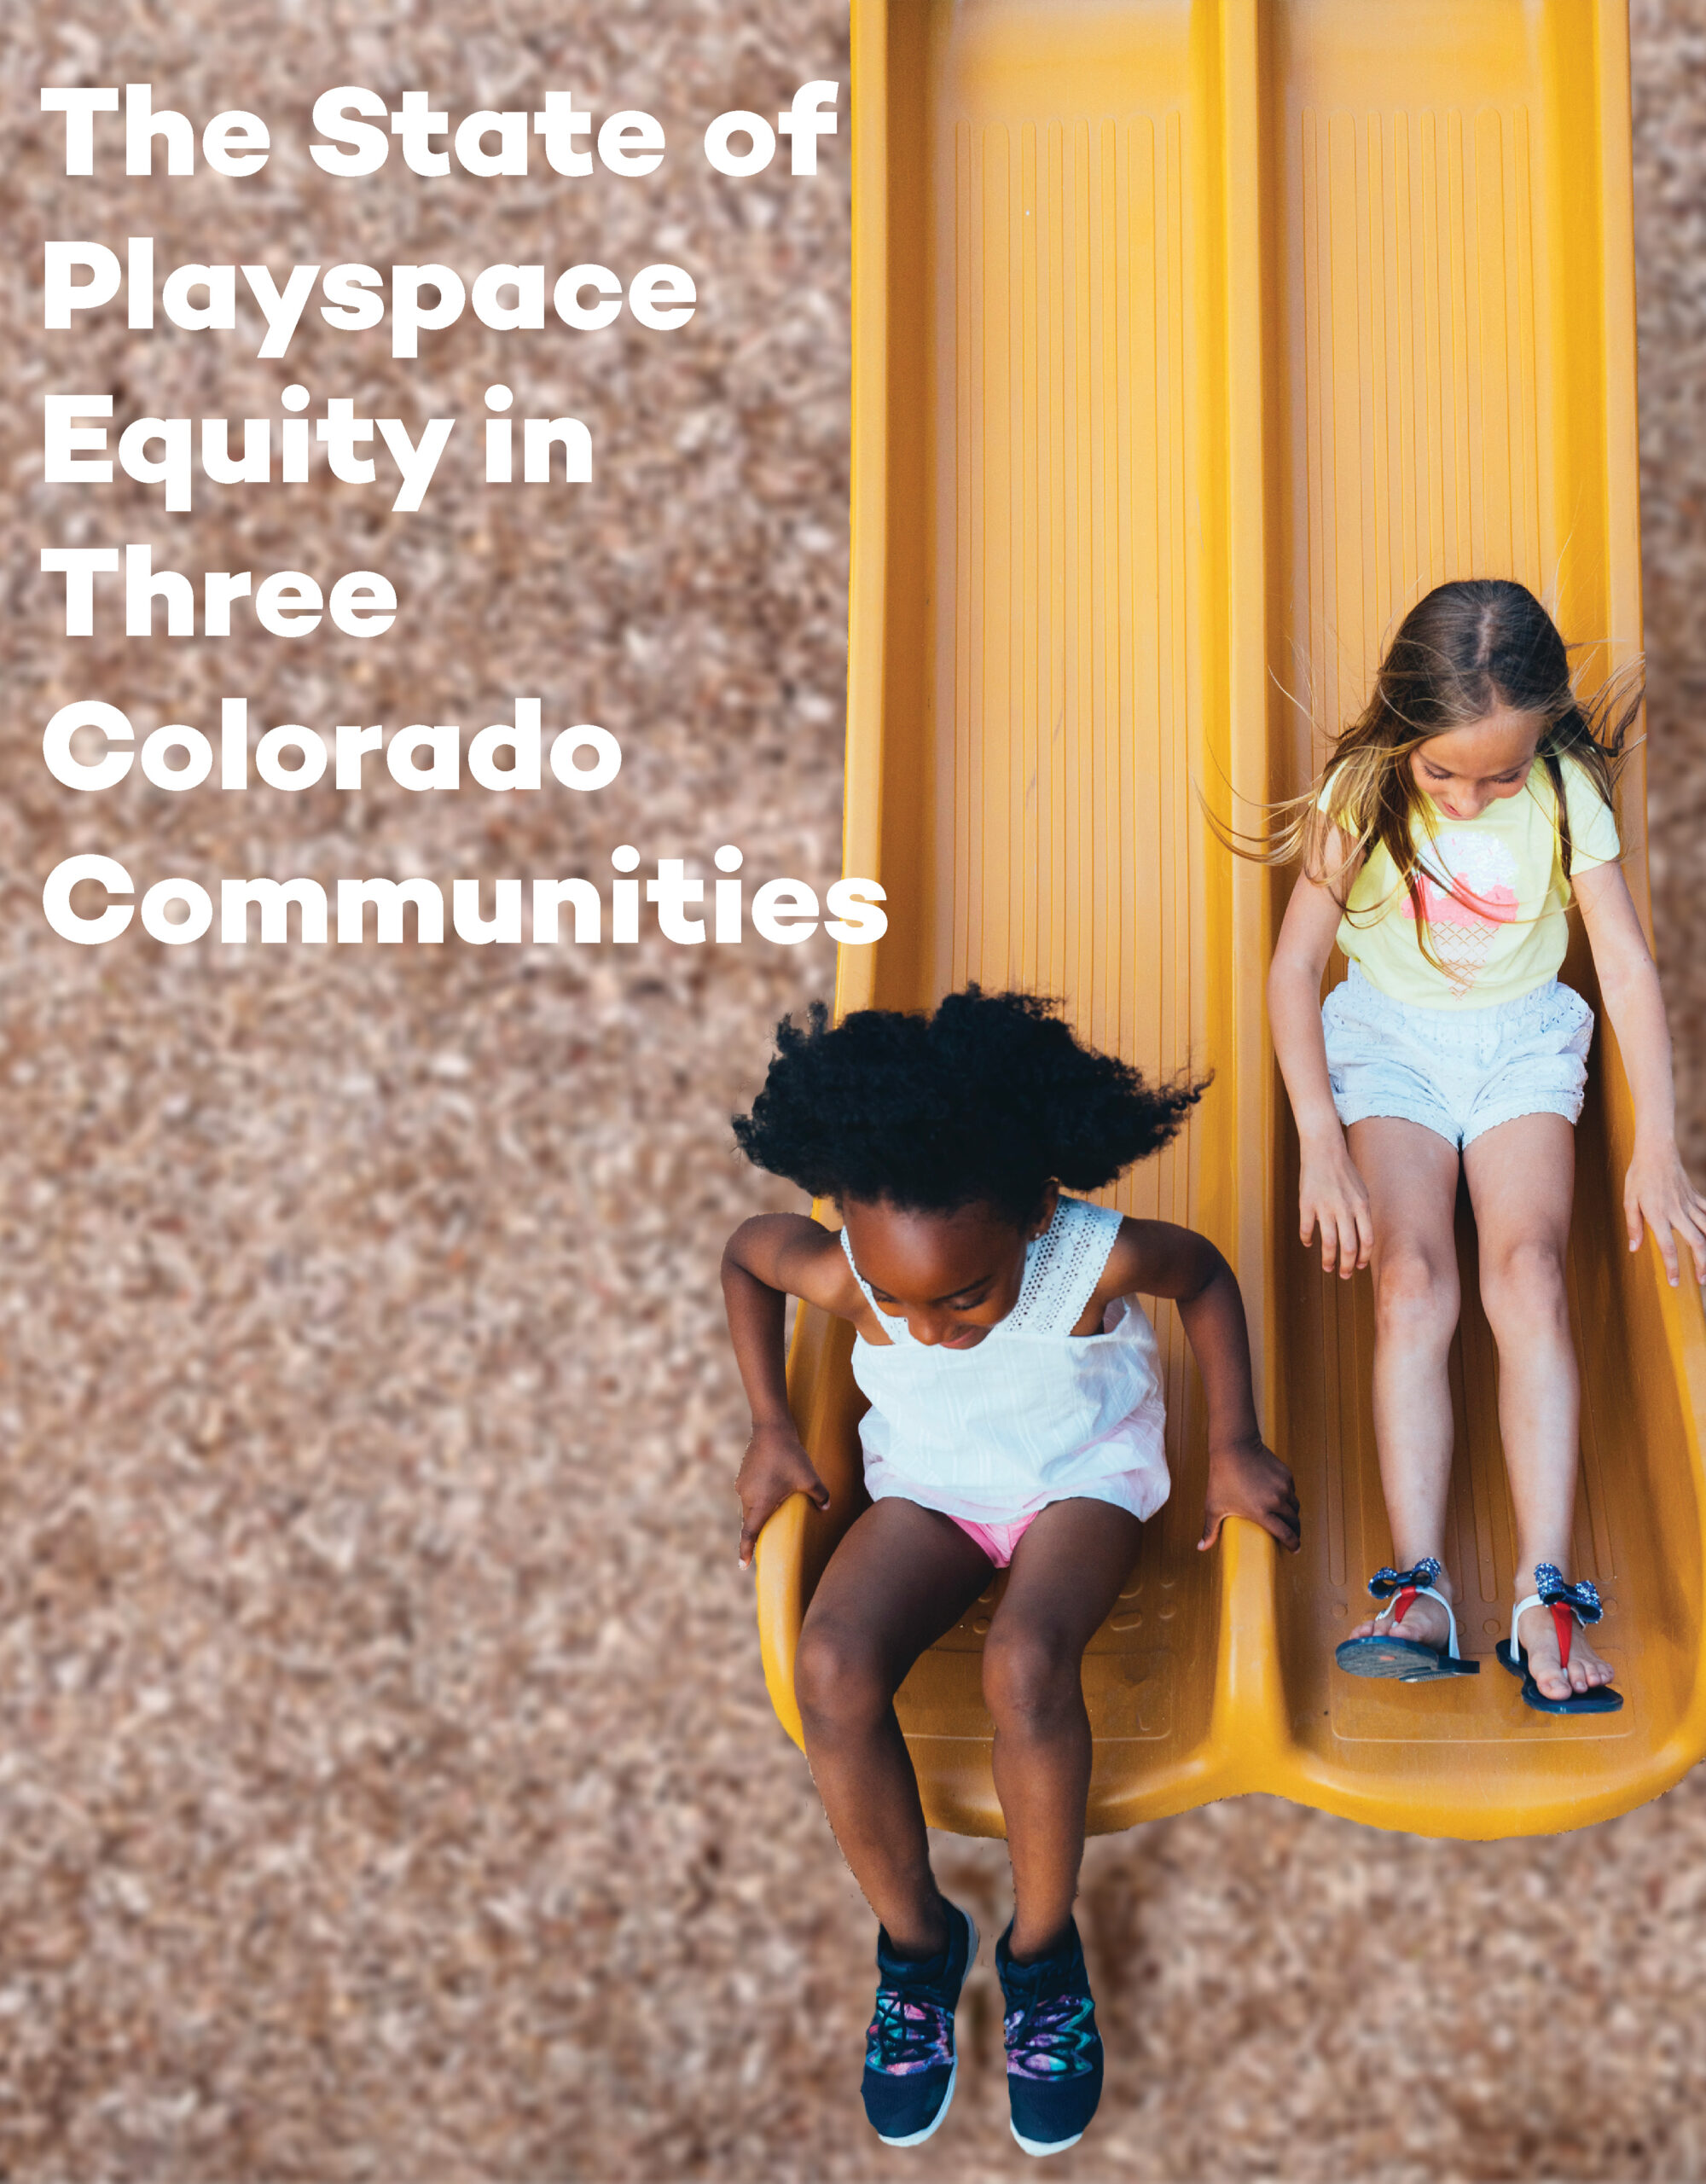 The State of Playspace Equity in Three Colorado Communities